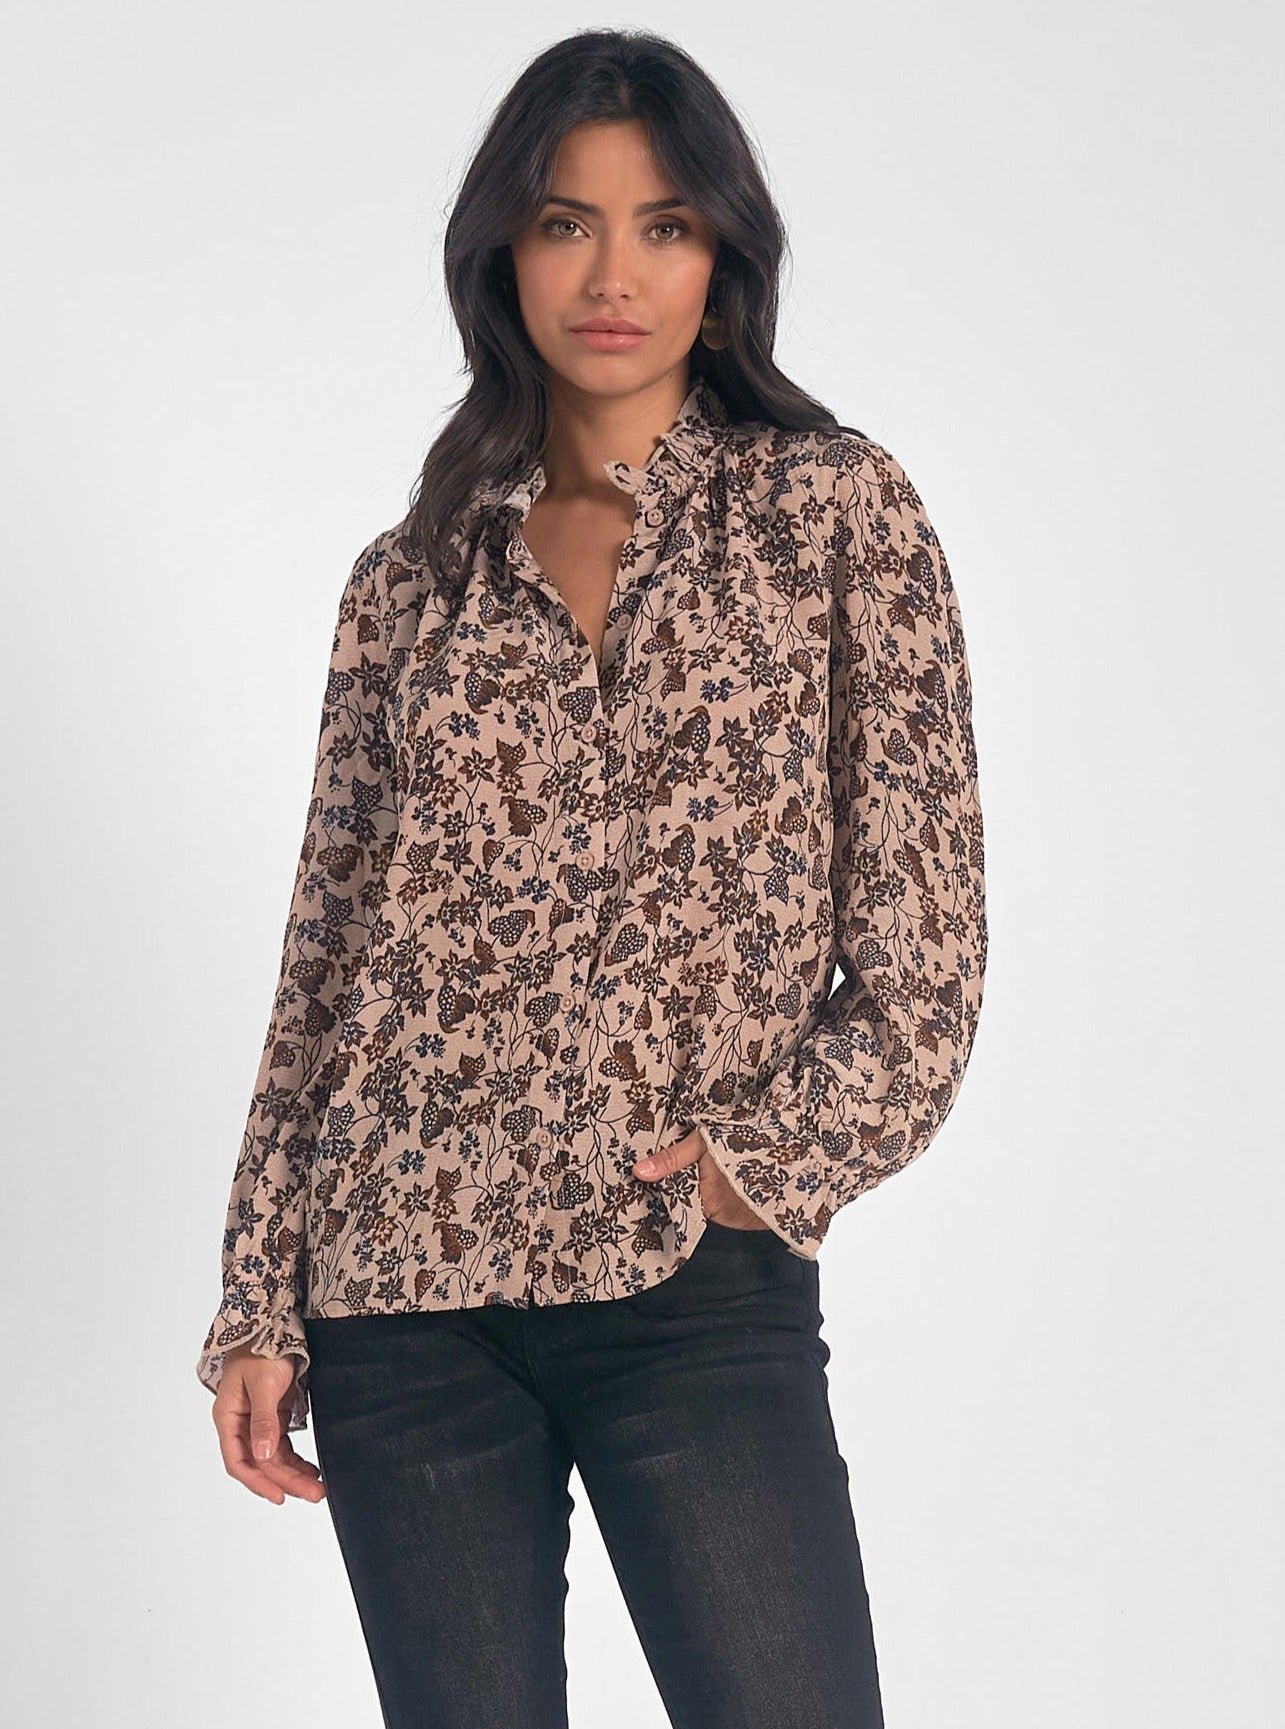 Napa floral print blouse in neutral tones with ruffled collar and sleeves from Elan - Tru Blue Boutique